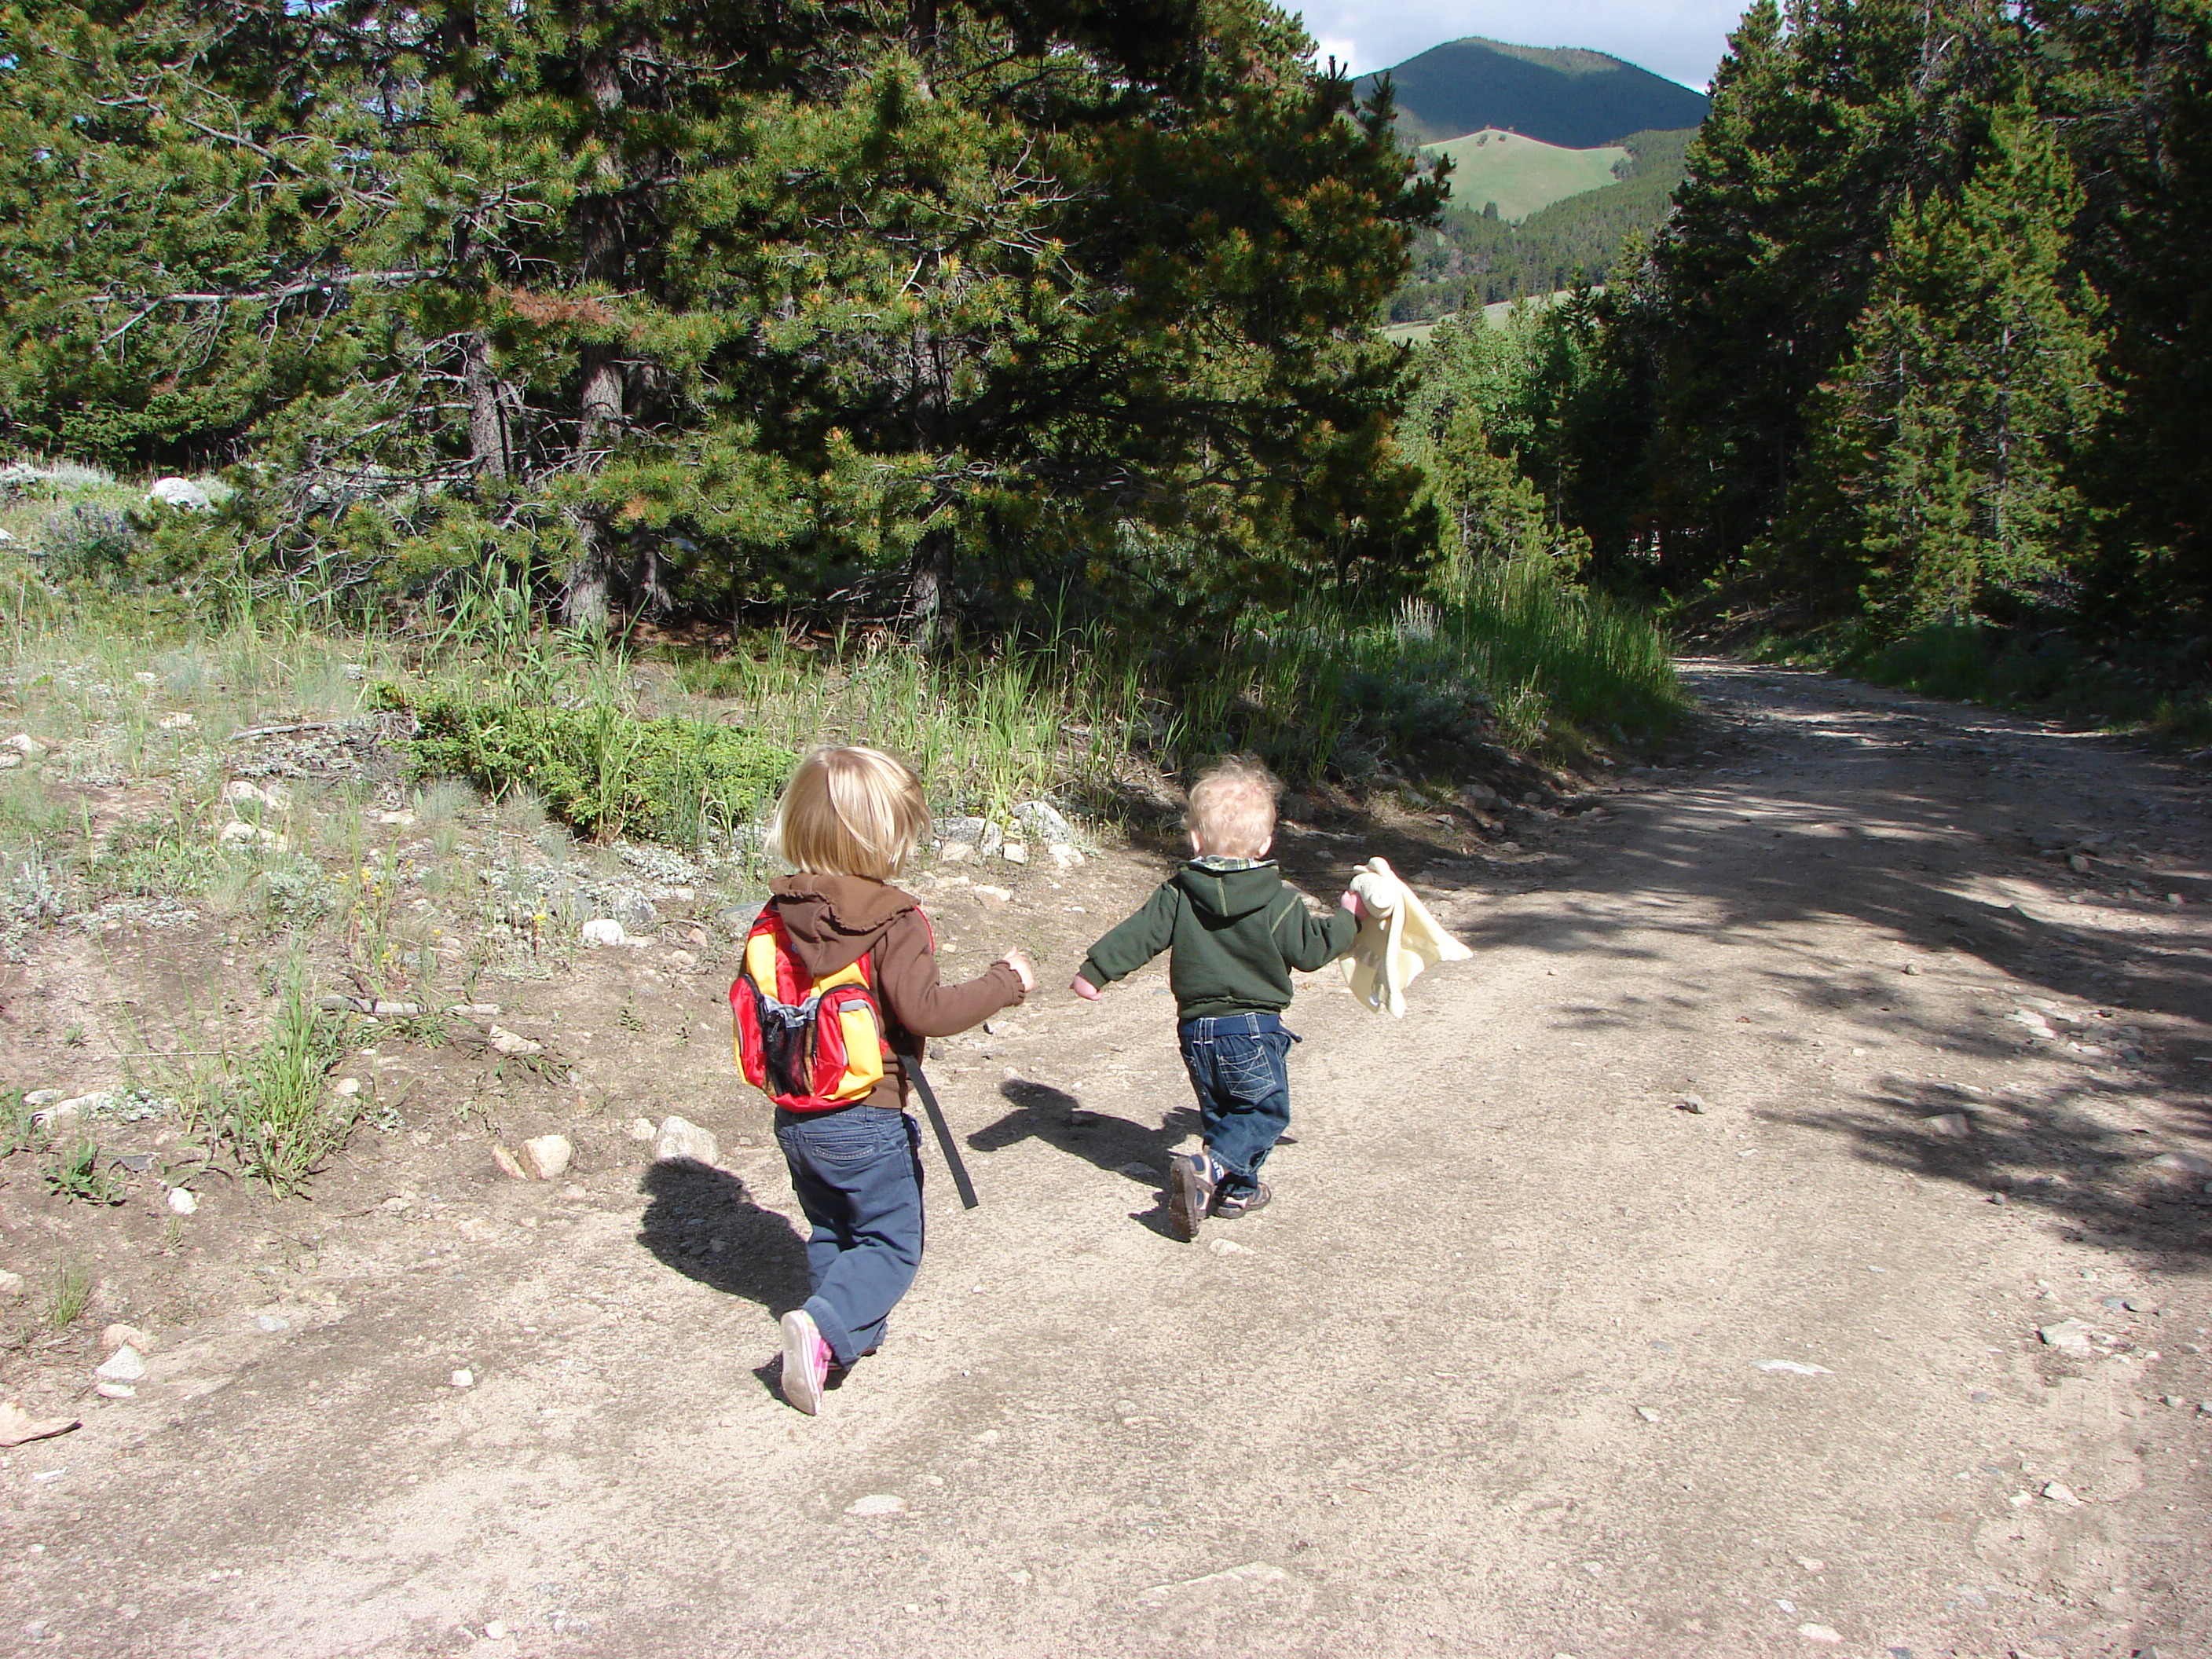 June and Matteo run down the trail.